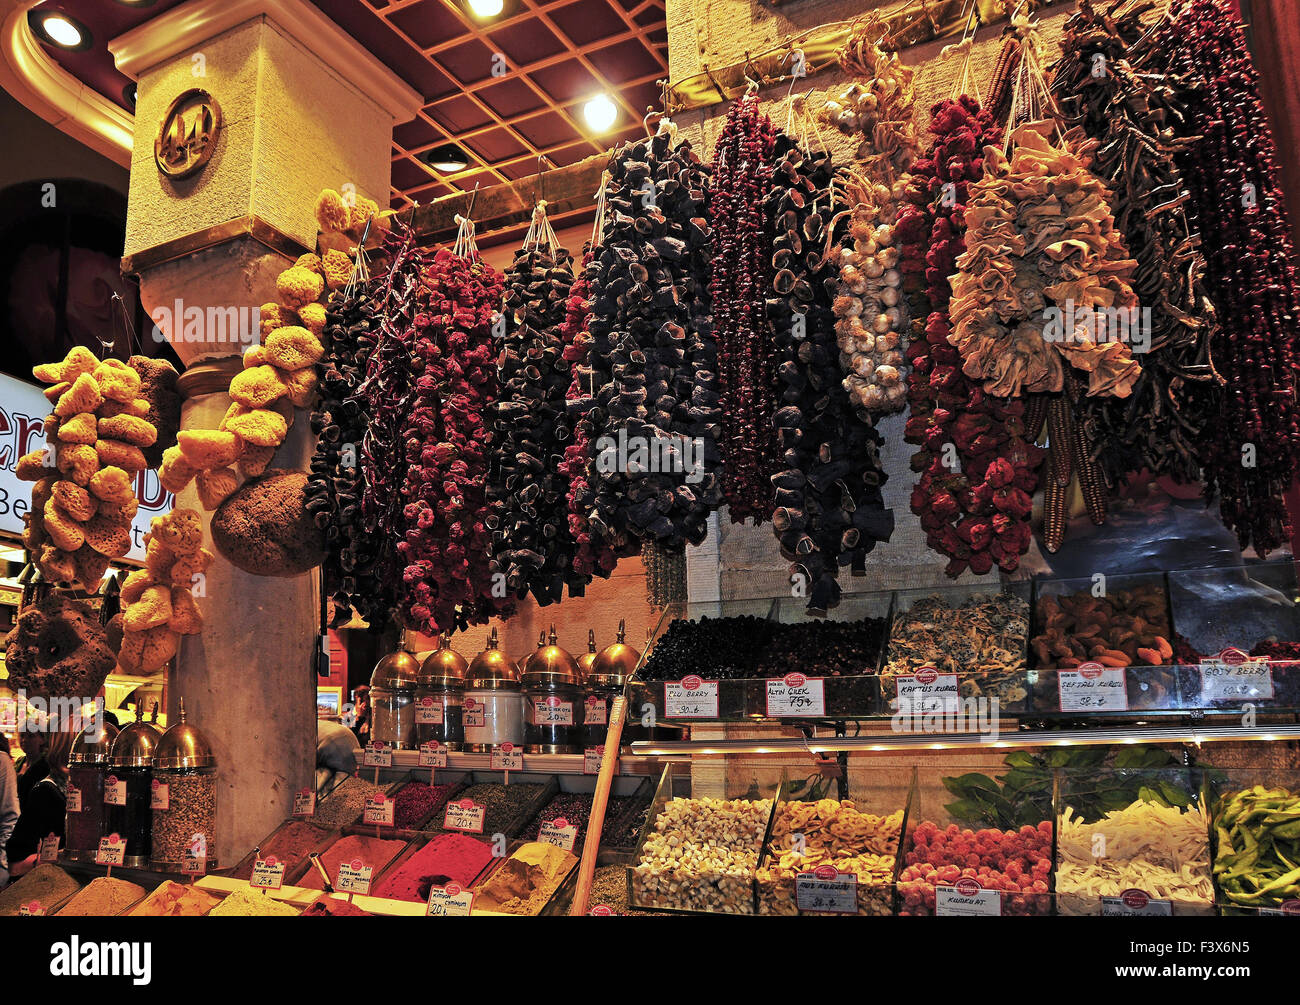 Spice Market in Istanbul Stock Photo